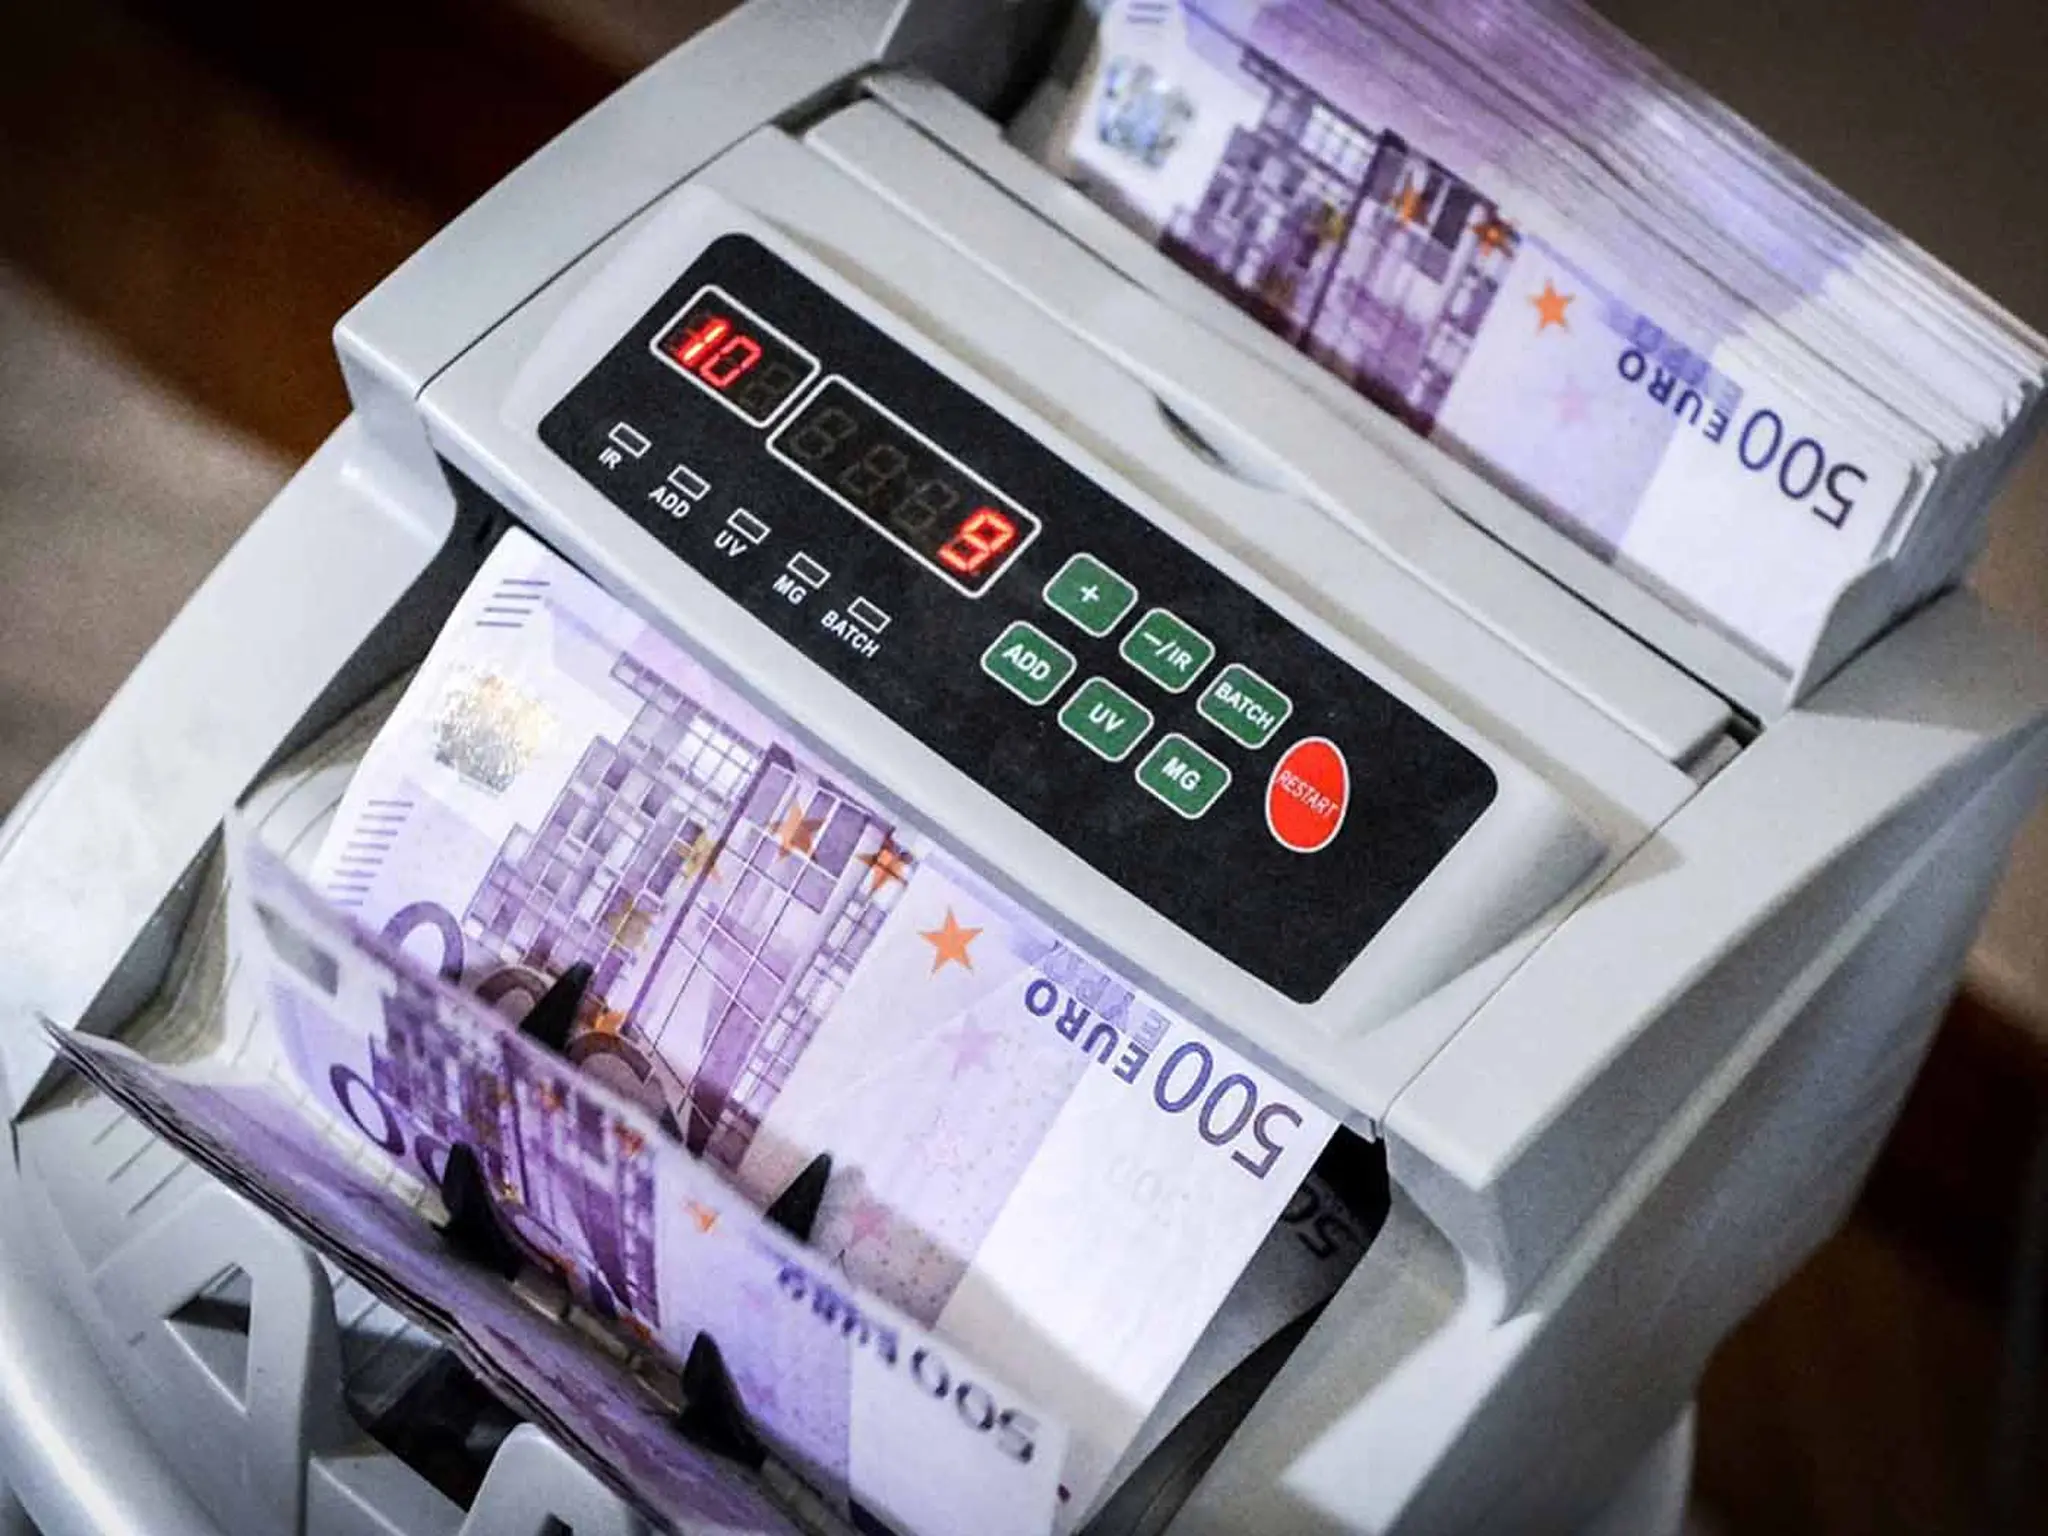 UAE launches electronic platform to fight money laundering and counterfeiting